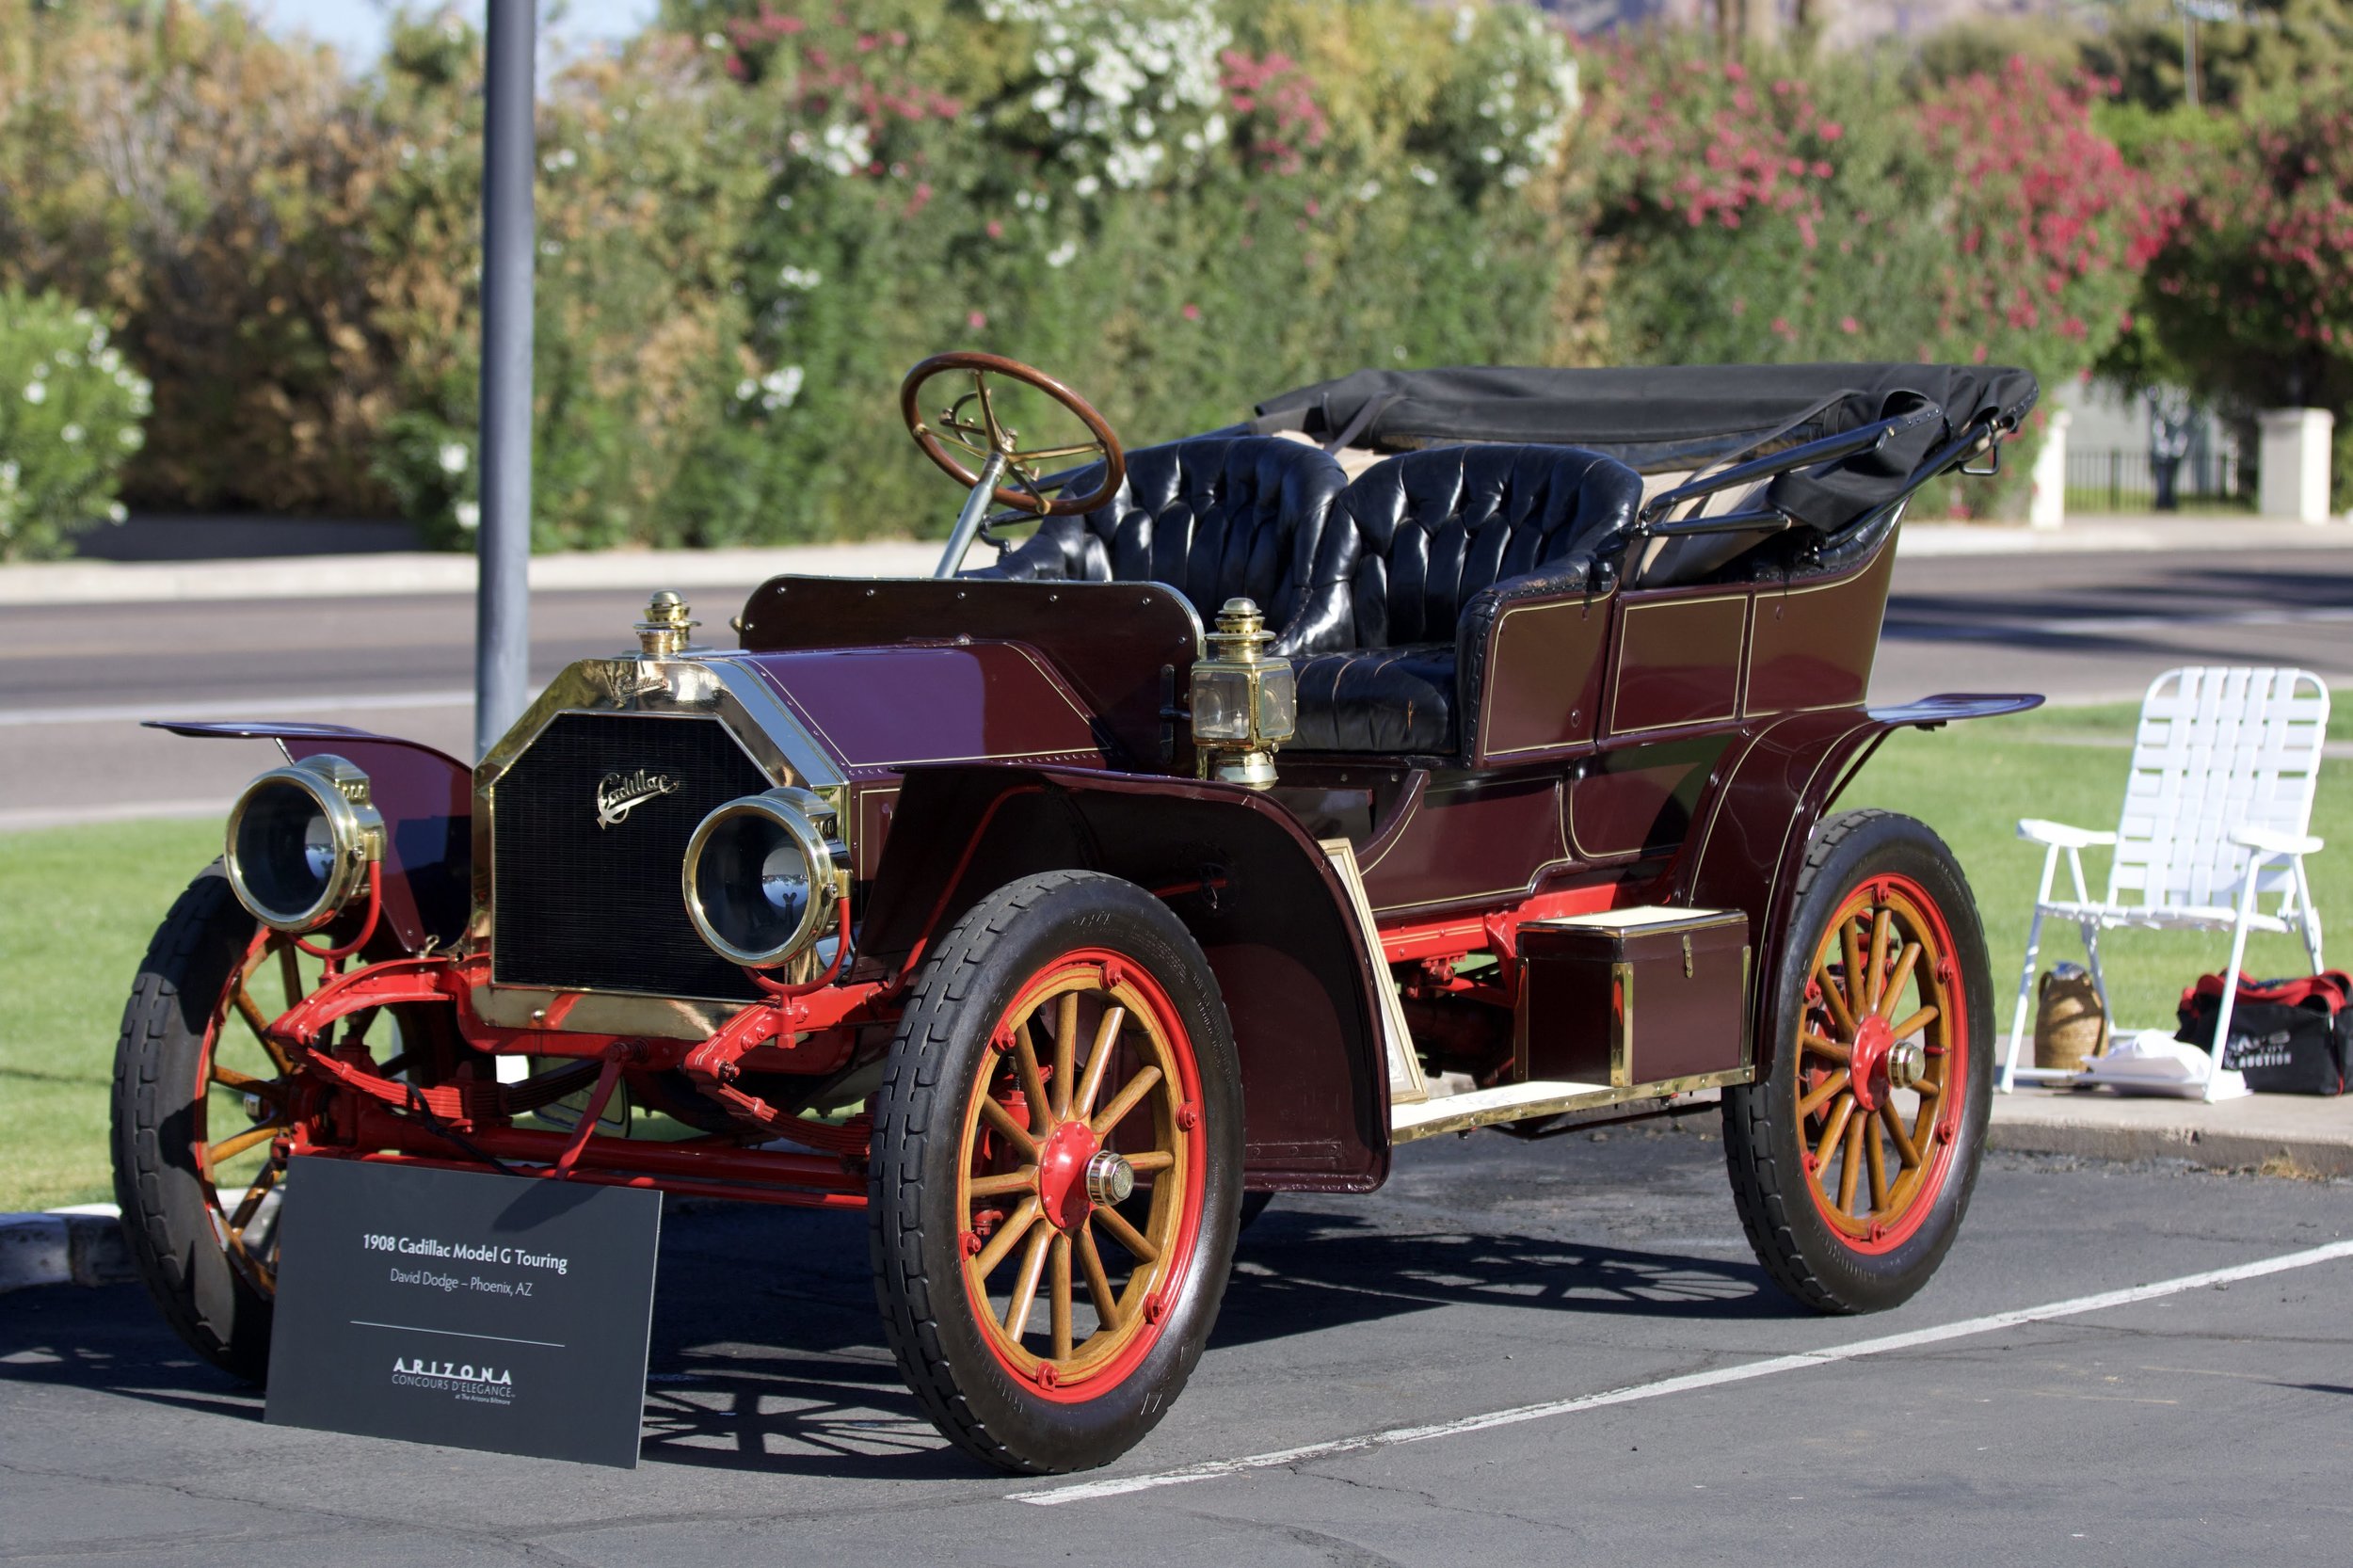 This 1908 Cadillac Touring car owned by David Dodge of Arcadia has been in the Dodge family for 110 years now.